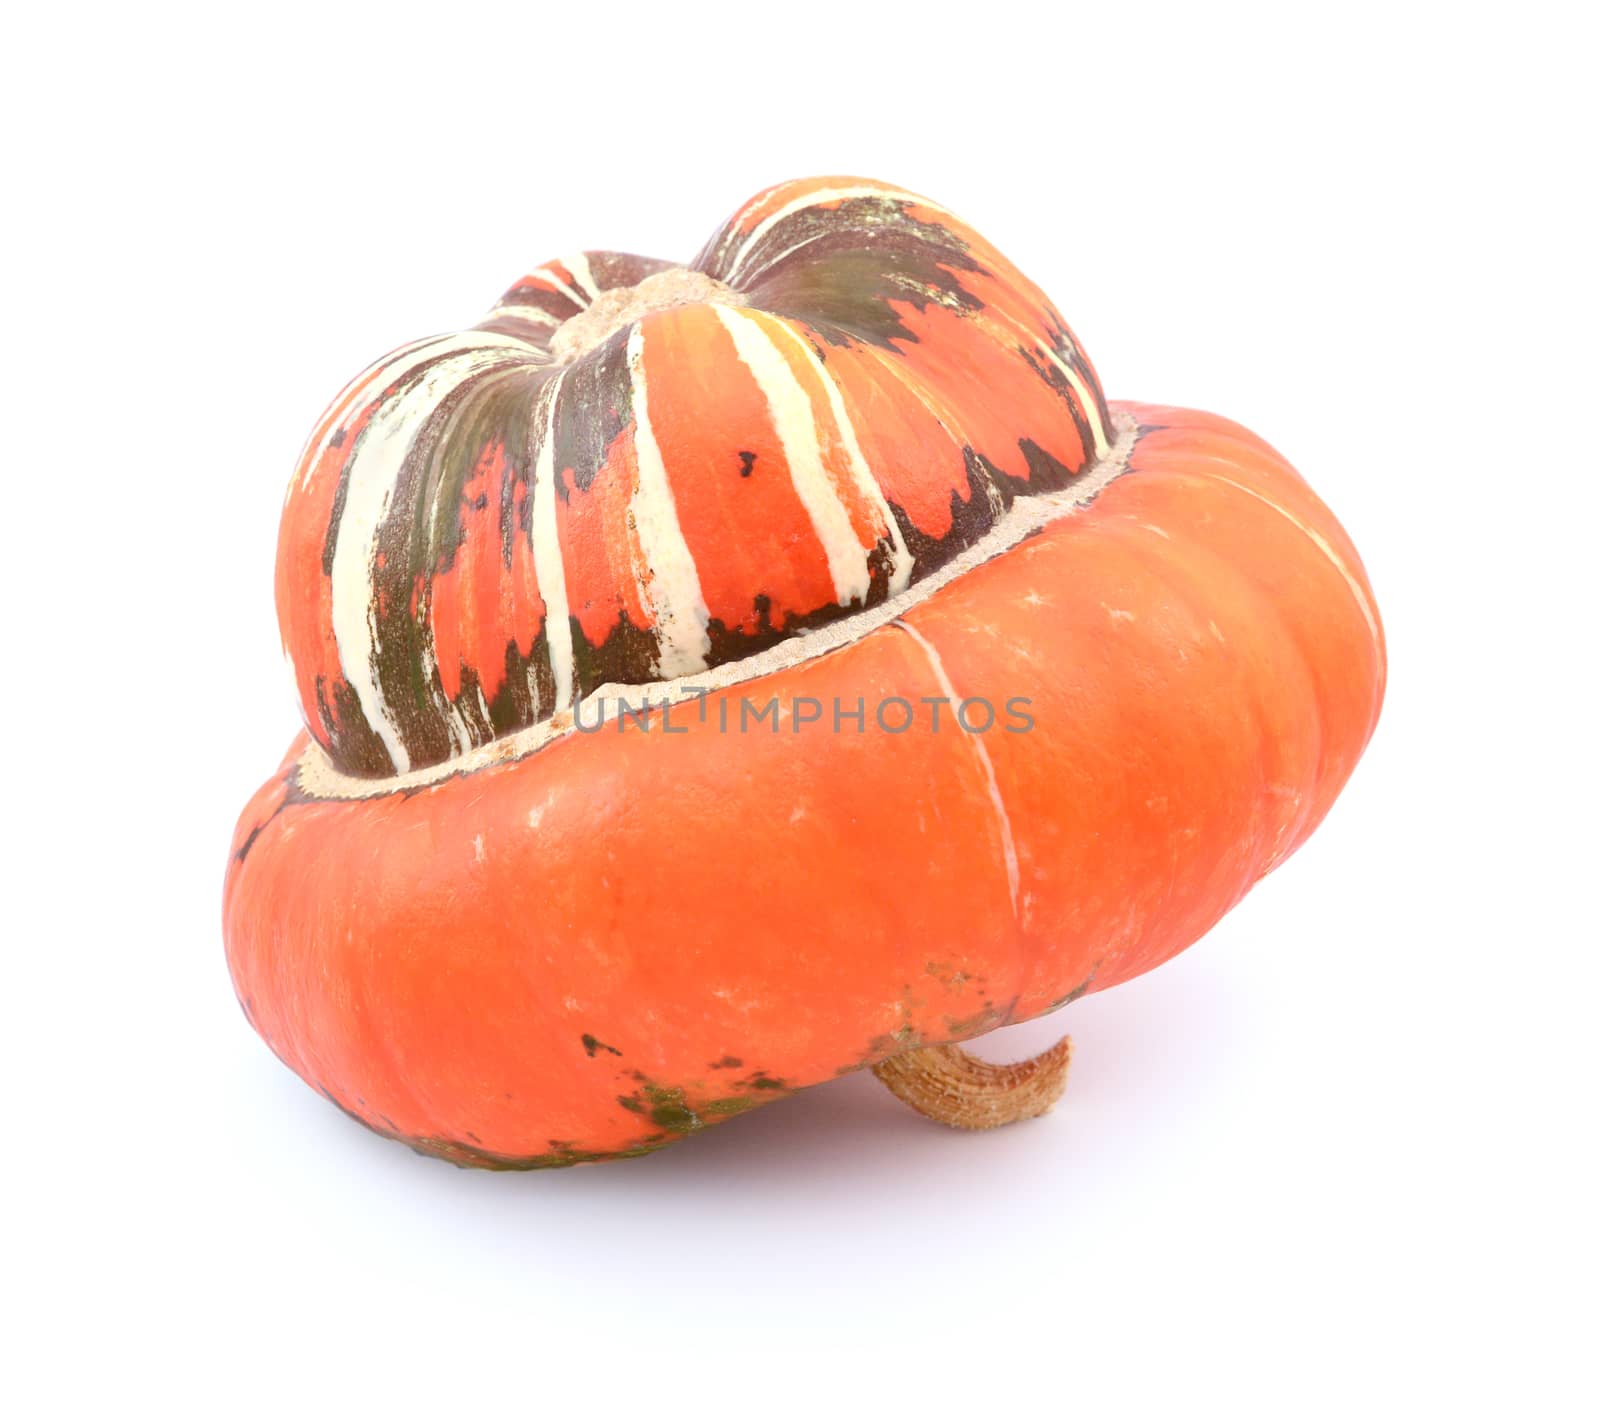 Profile of large Turks Turban gourd, with a smooth orange cap, resting on its stem on a white background